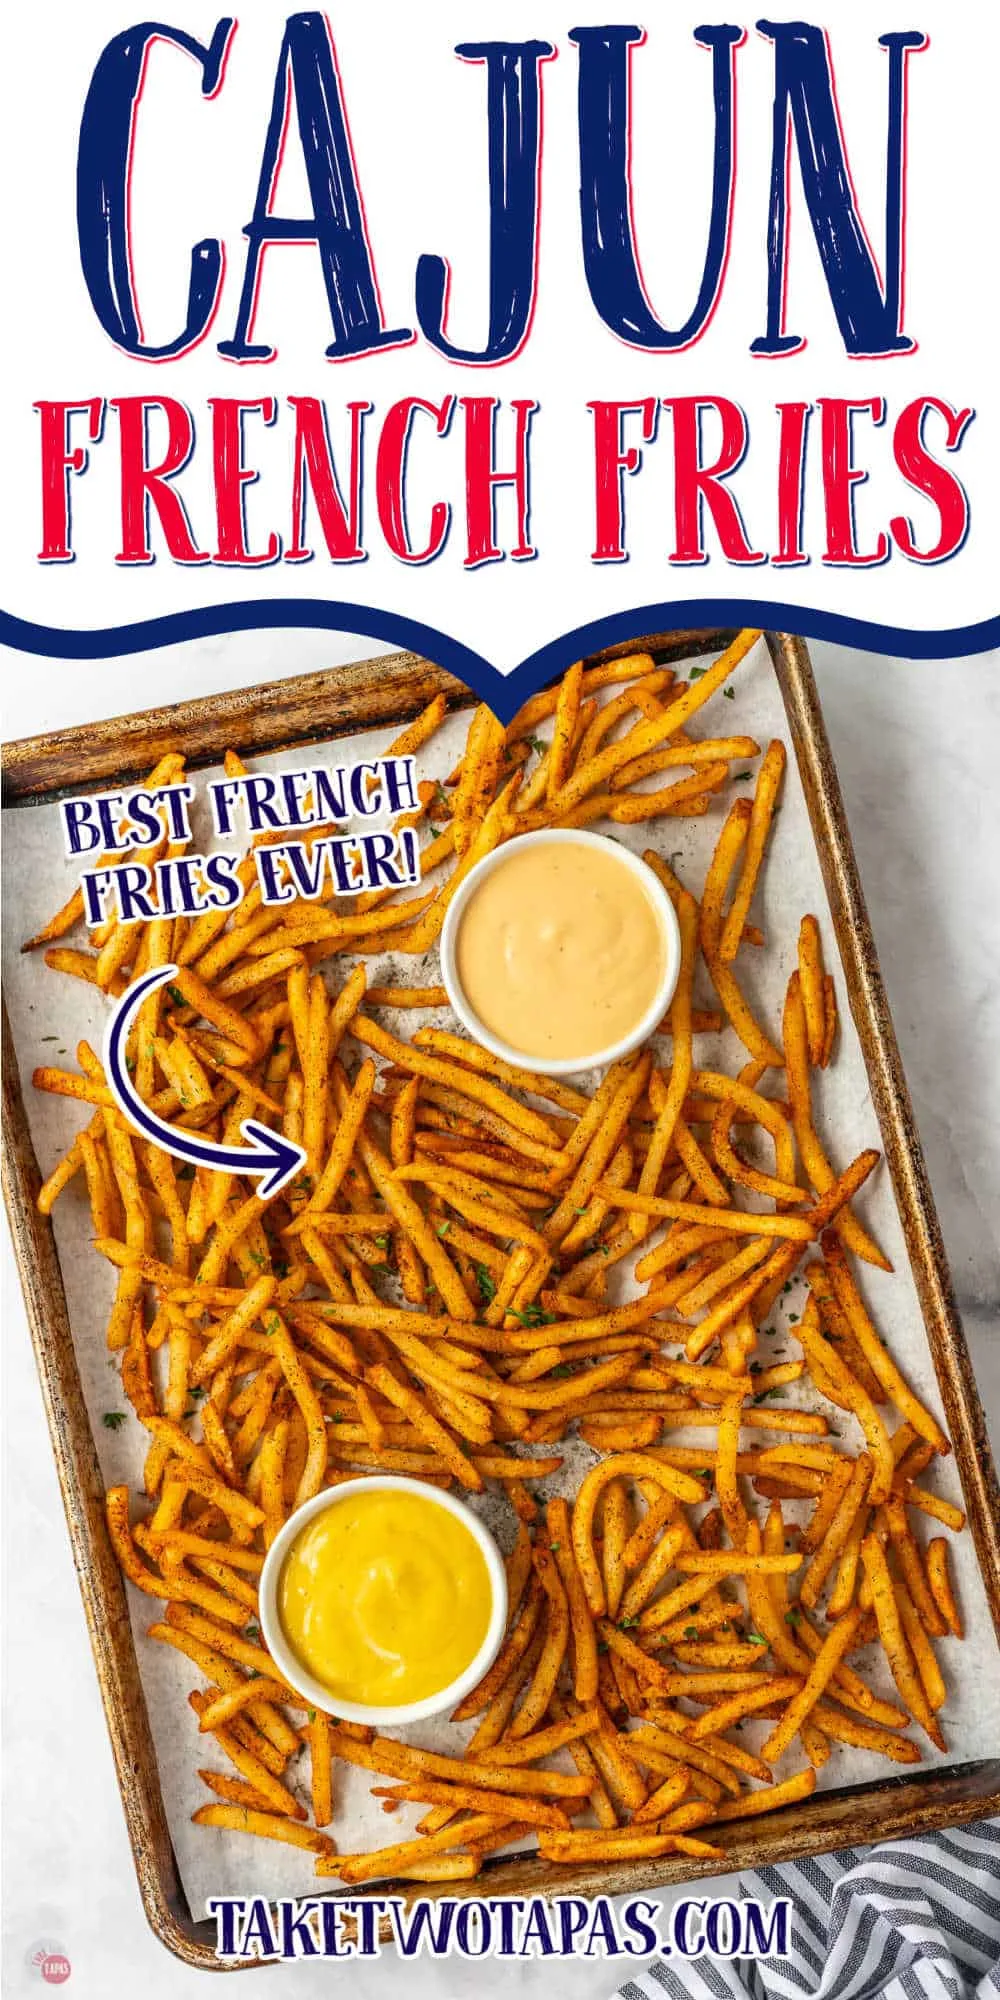 sheet pan with french fries and text "cajun french fries"